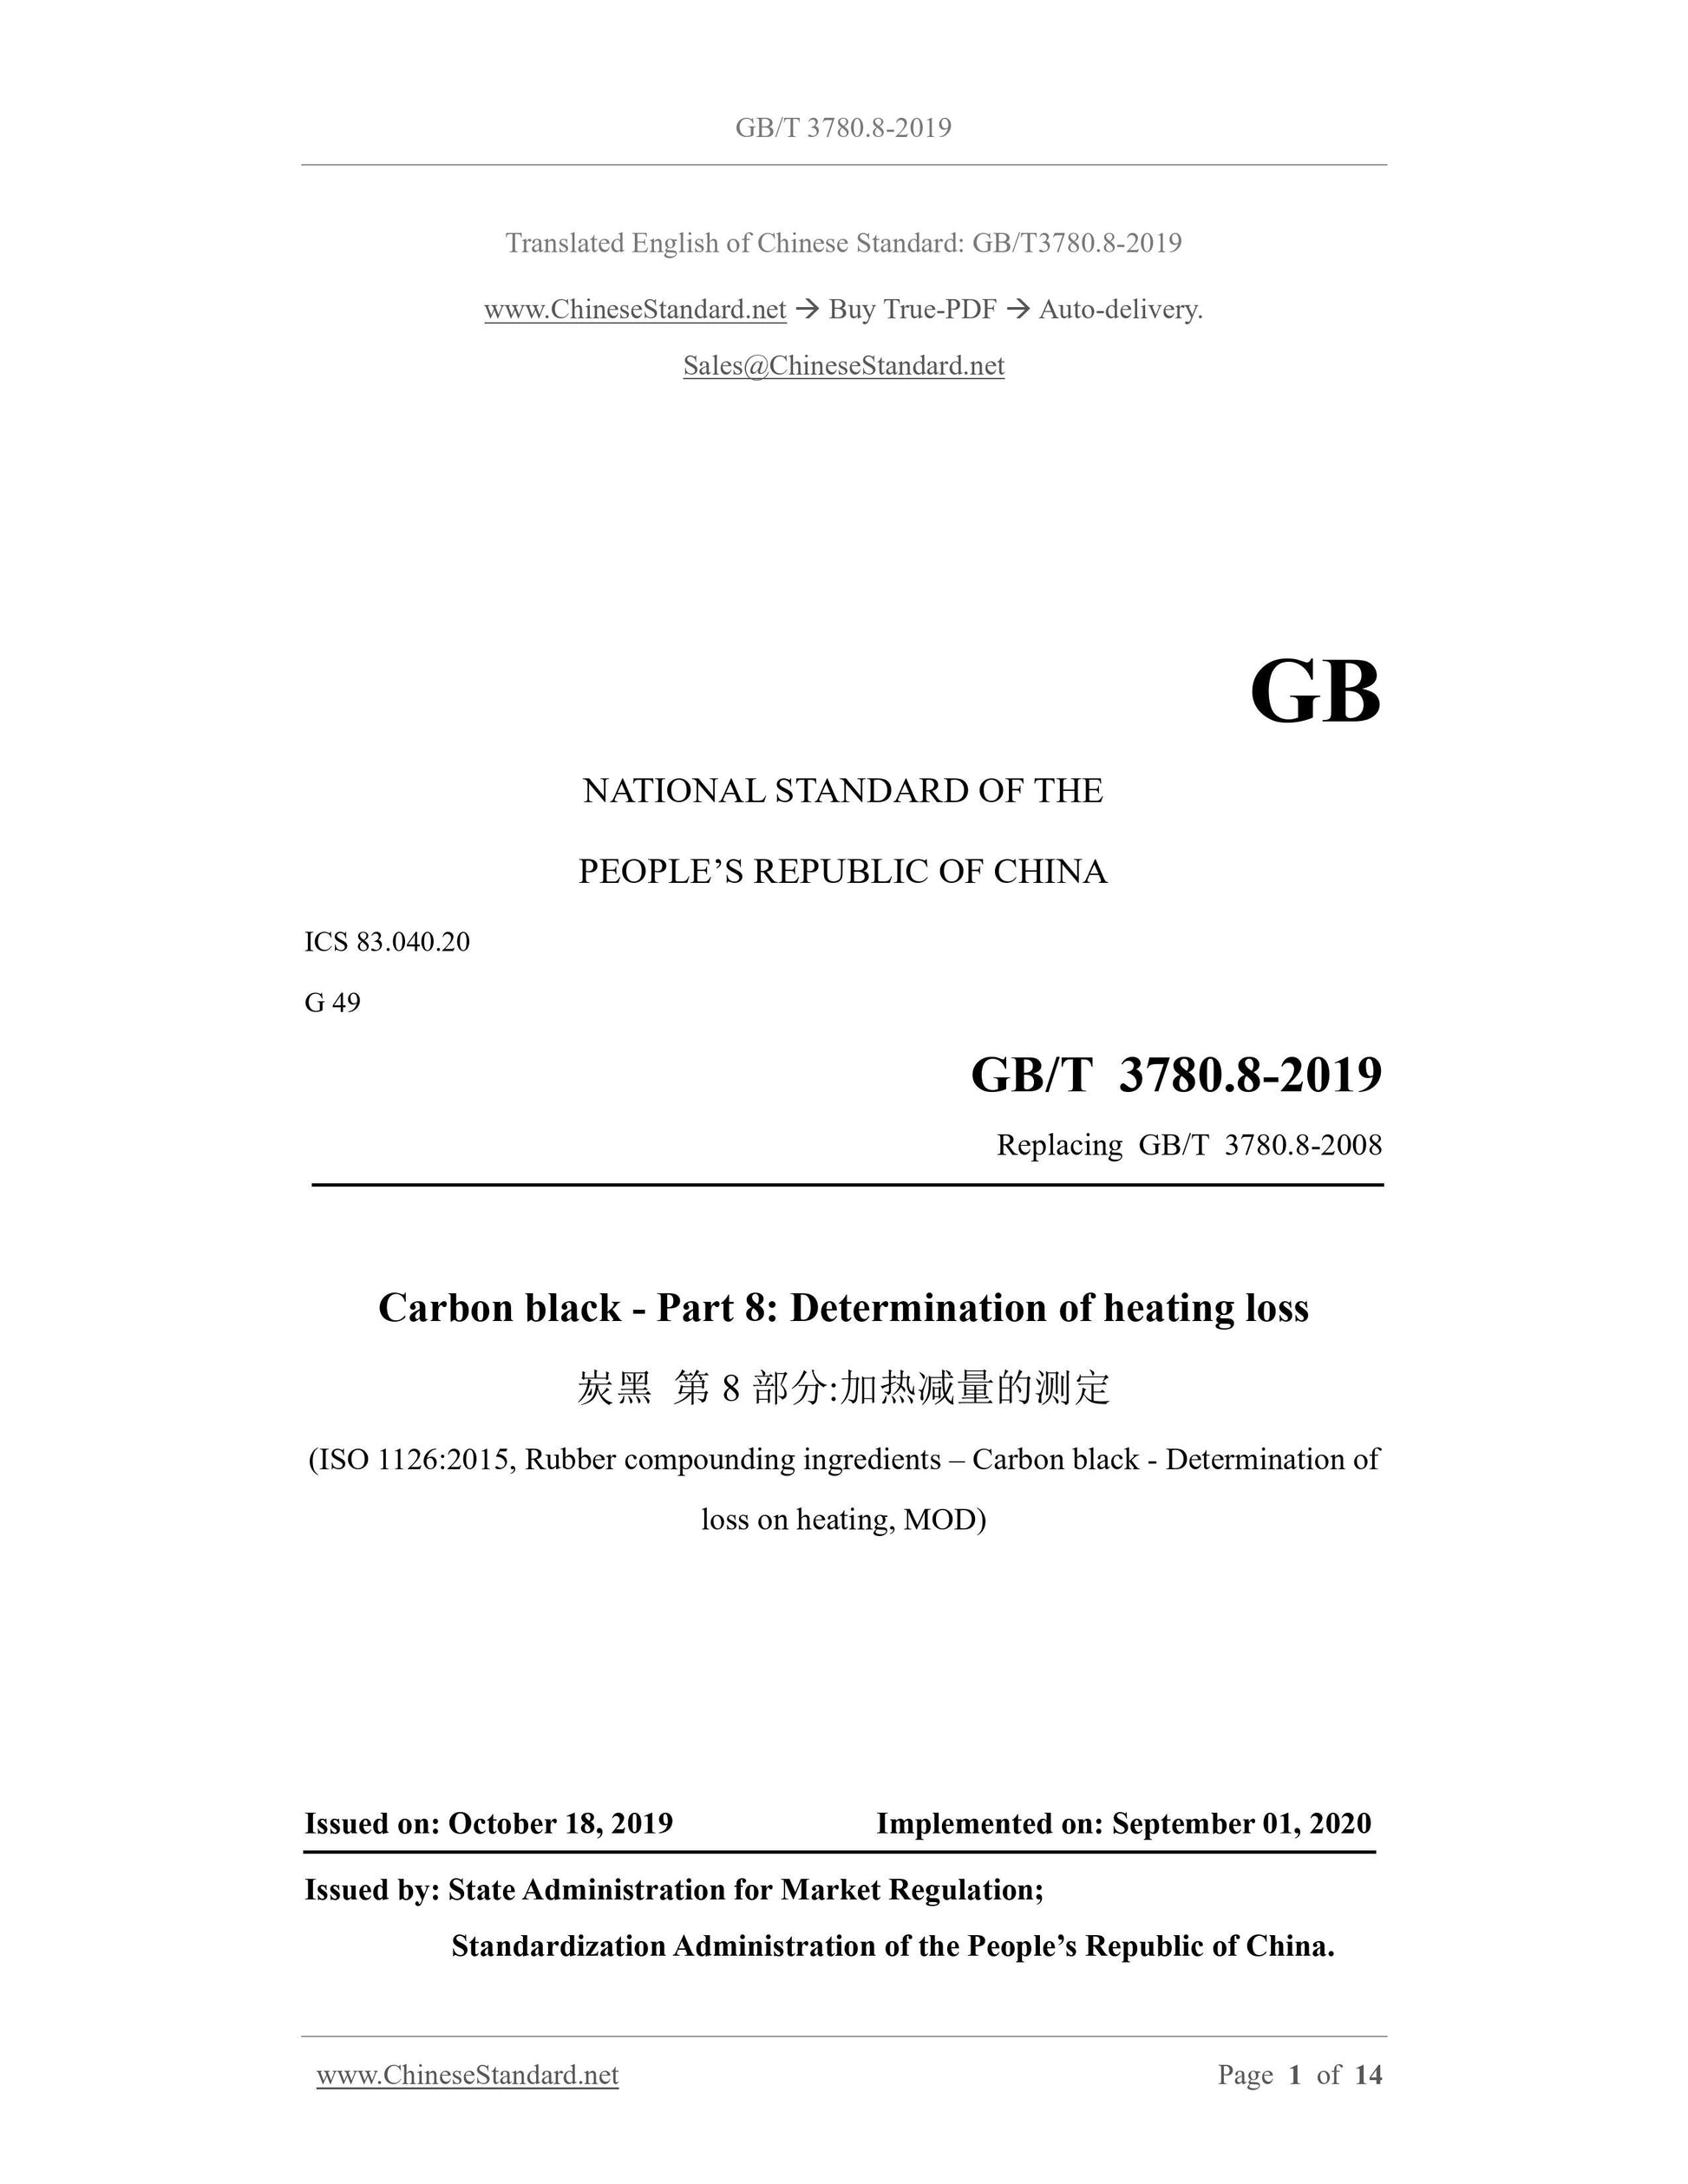 GB/T 3780.8-2019 Page 1